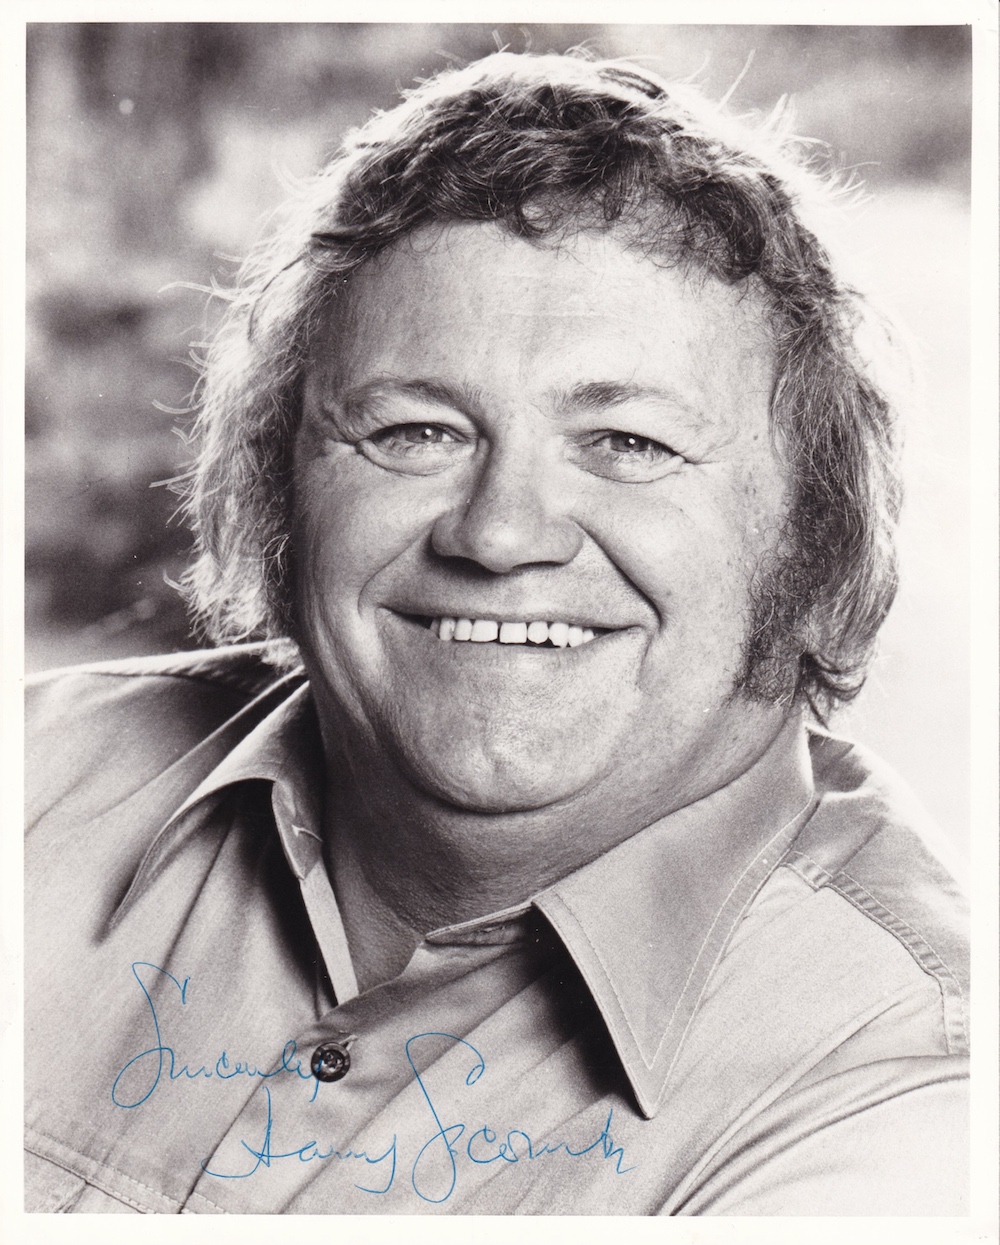 Harry Secombe Welsh Singer, Actor 10x8 inch Signed Photo. Good condition. All autographs come with a